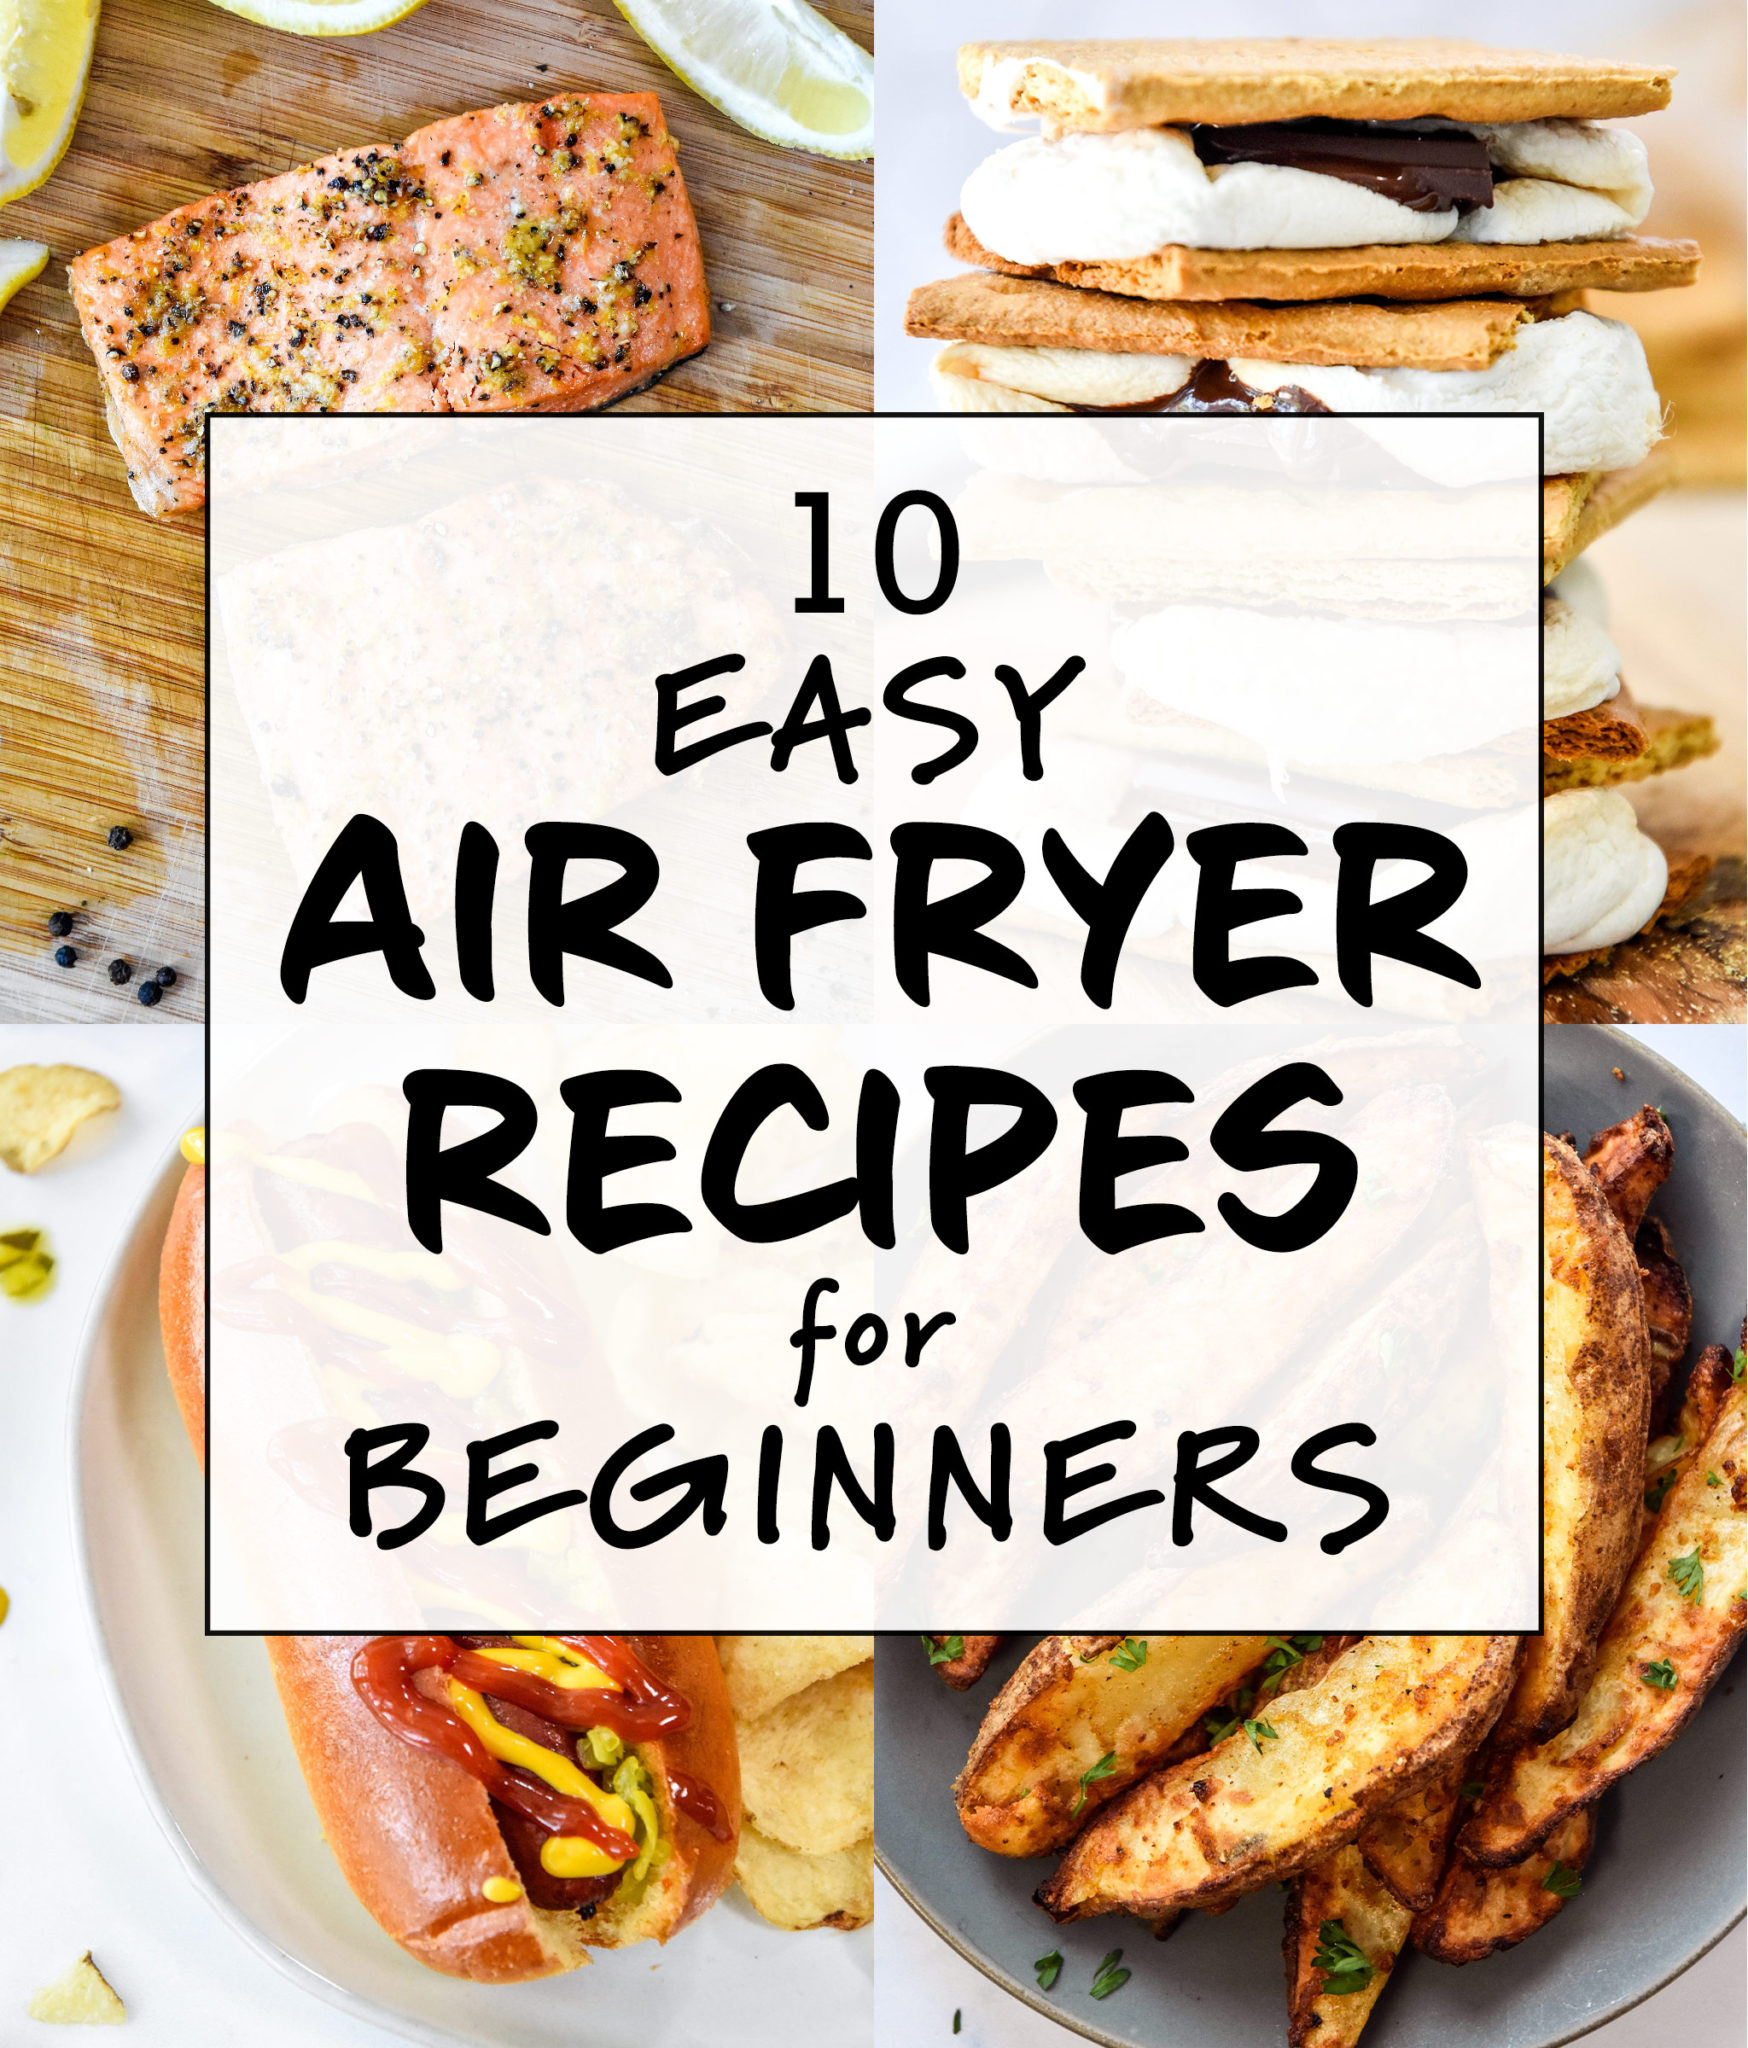 10-easy-air-fryer-recipes-for-beginners-project-meal-plan